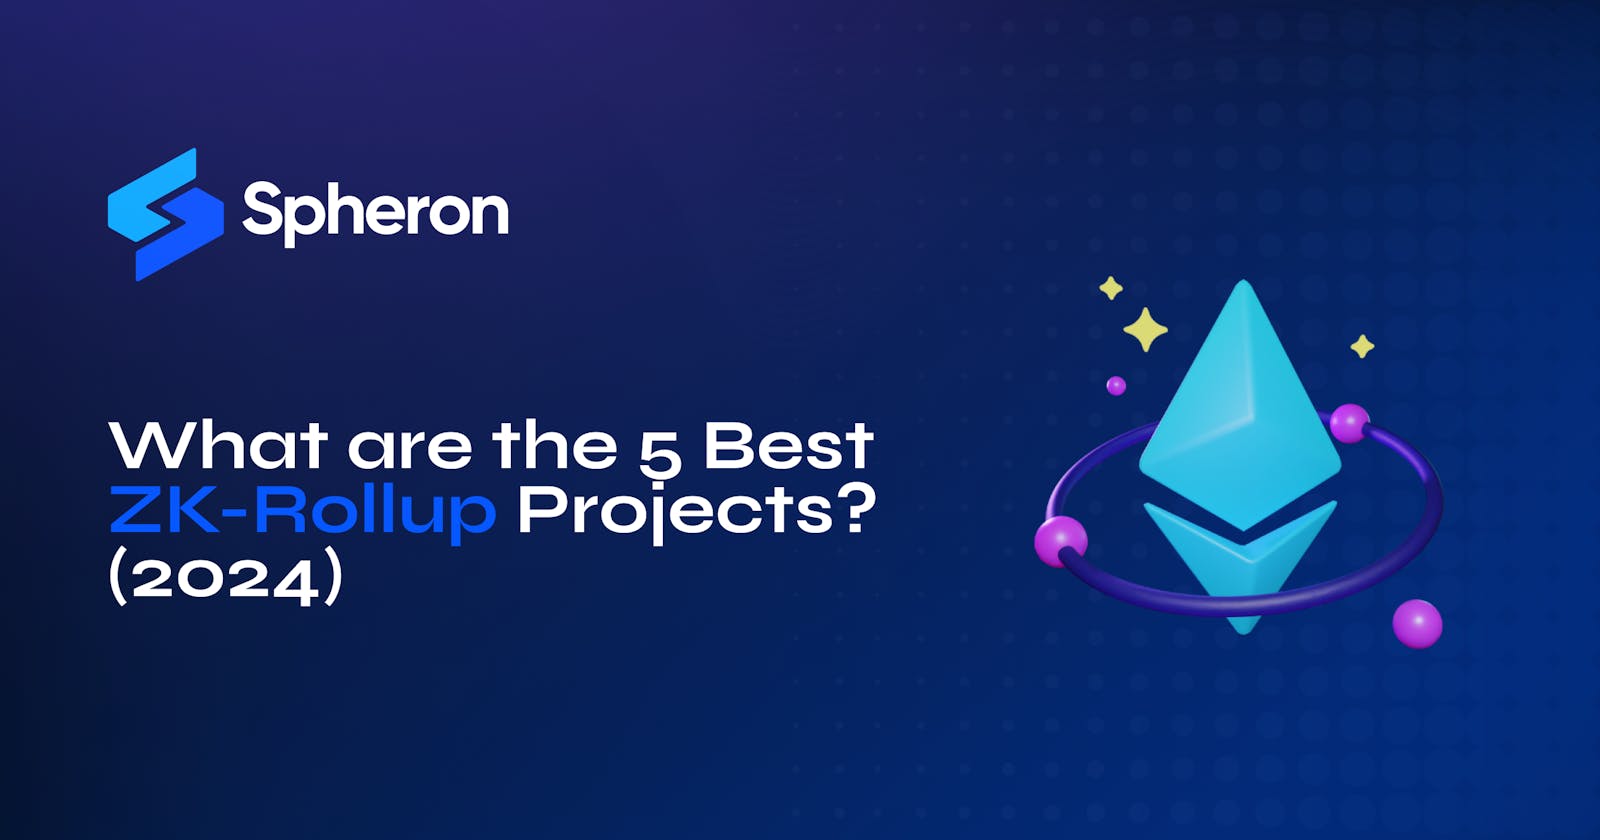 What are the 5 Best ZK-Rollup Projects? (2024)